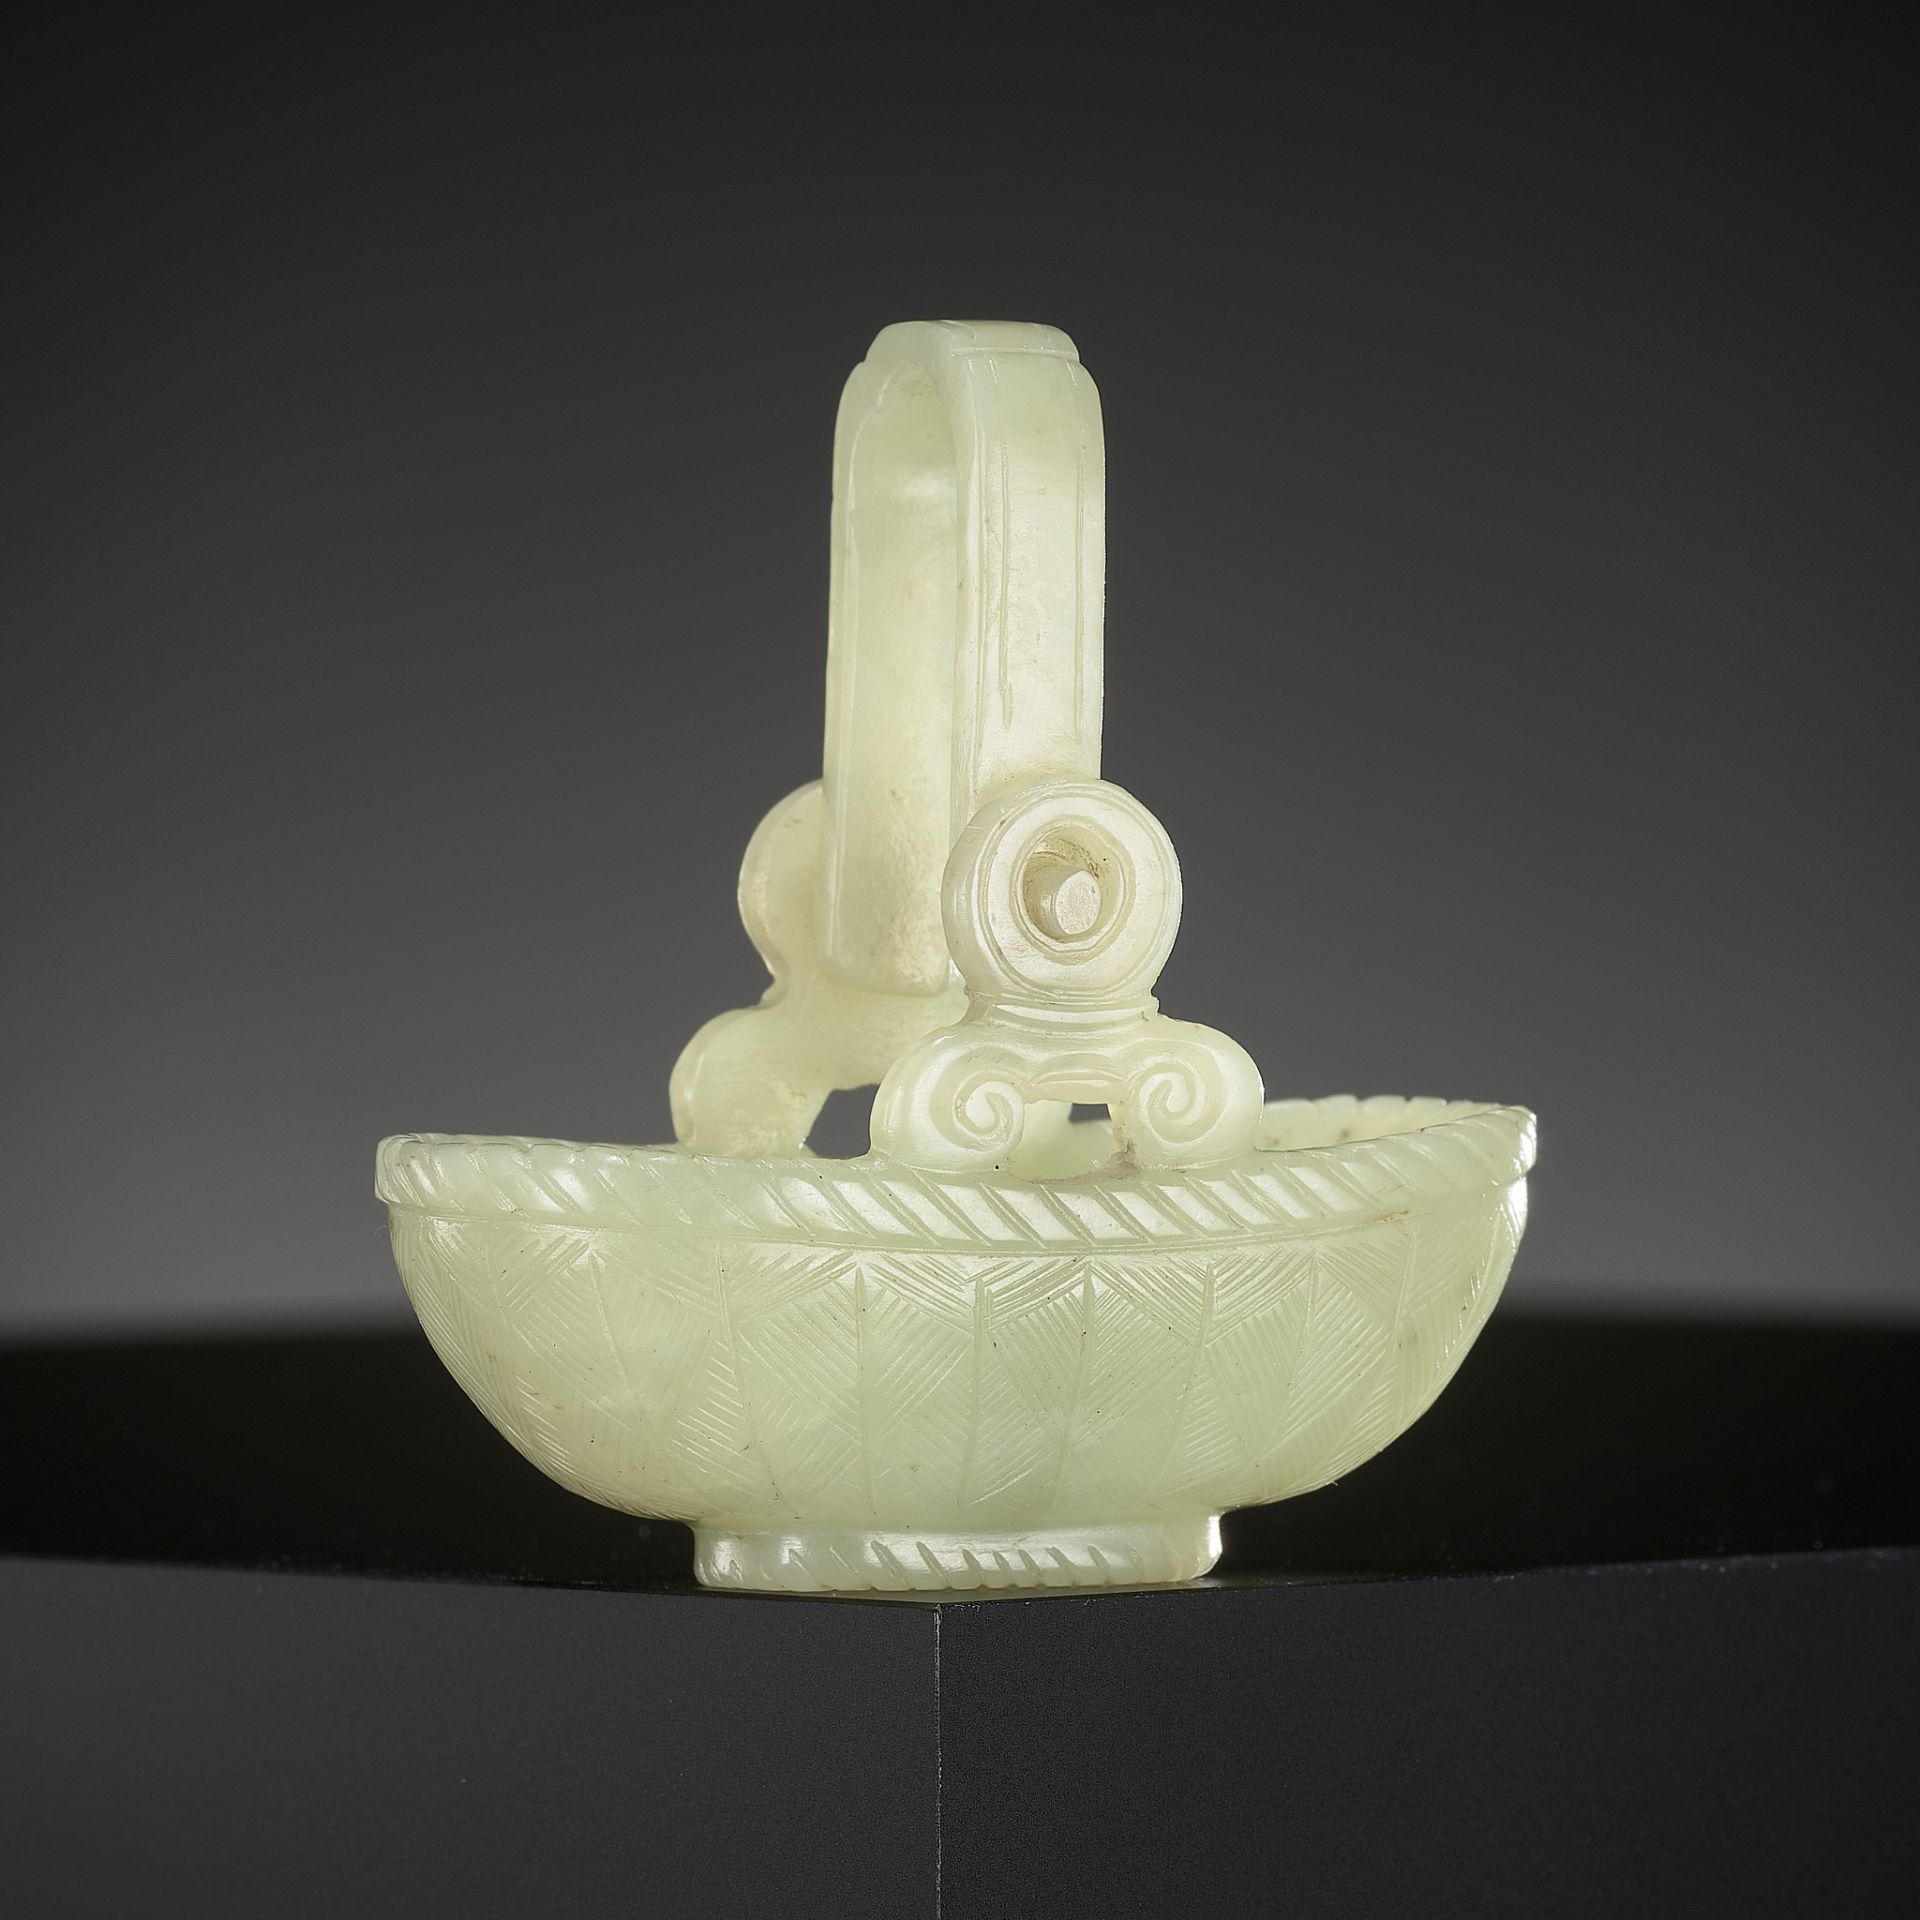 A YELLOW JADE CARVING OF A BASKET WITH MOVABLE HANDLE, CHINA, 18TH CENTURY